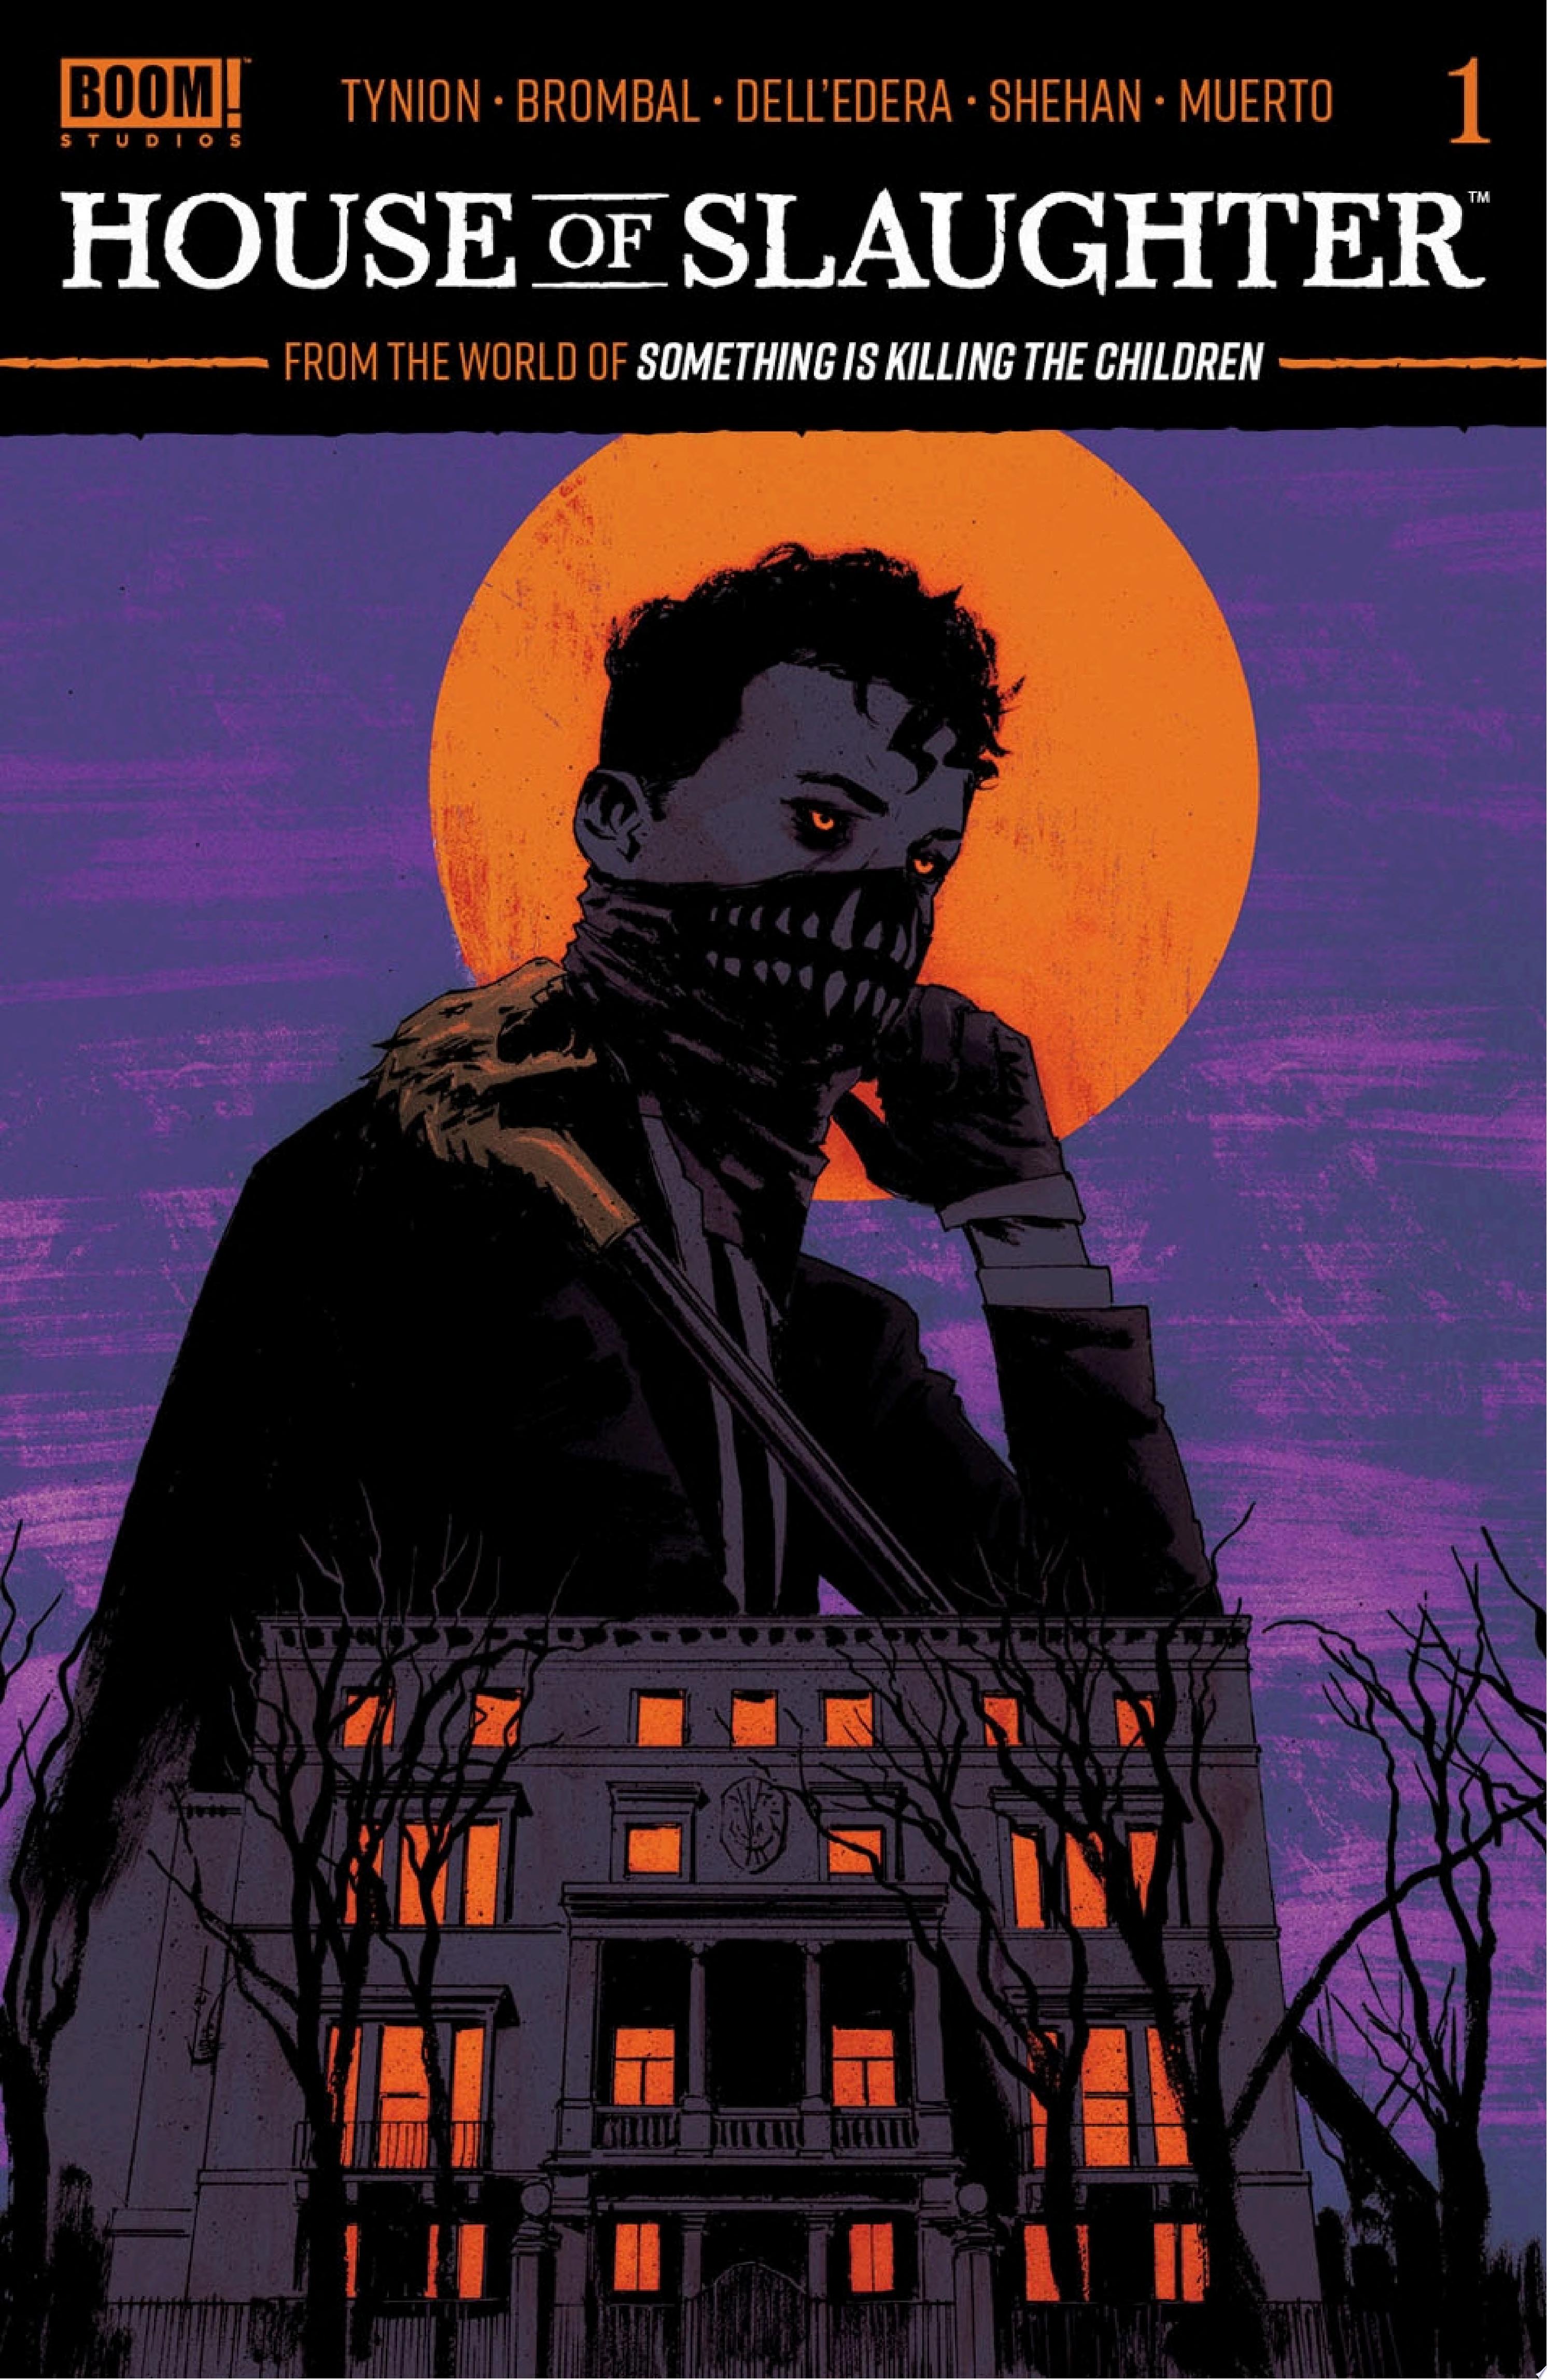 Image for "House of Slaughter #1"